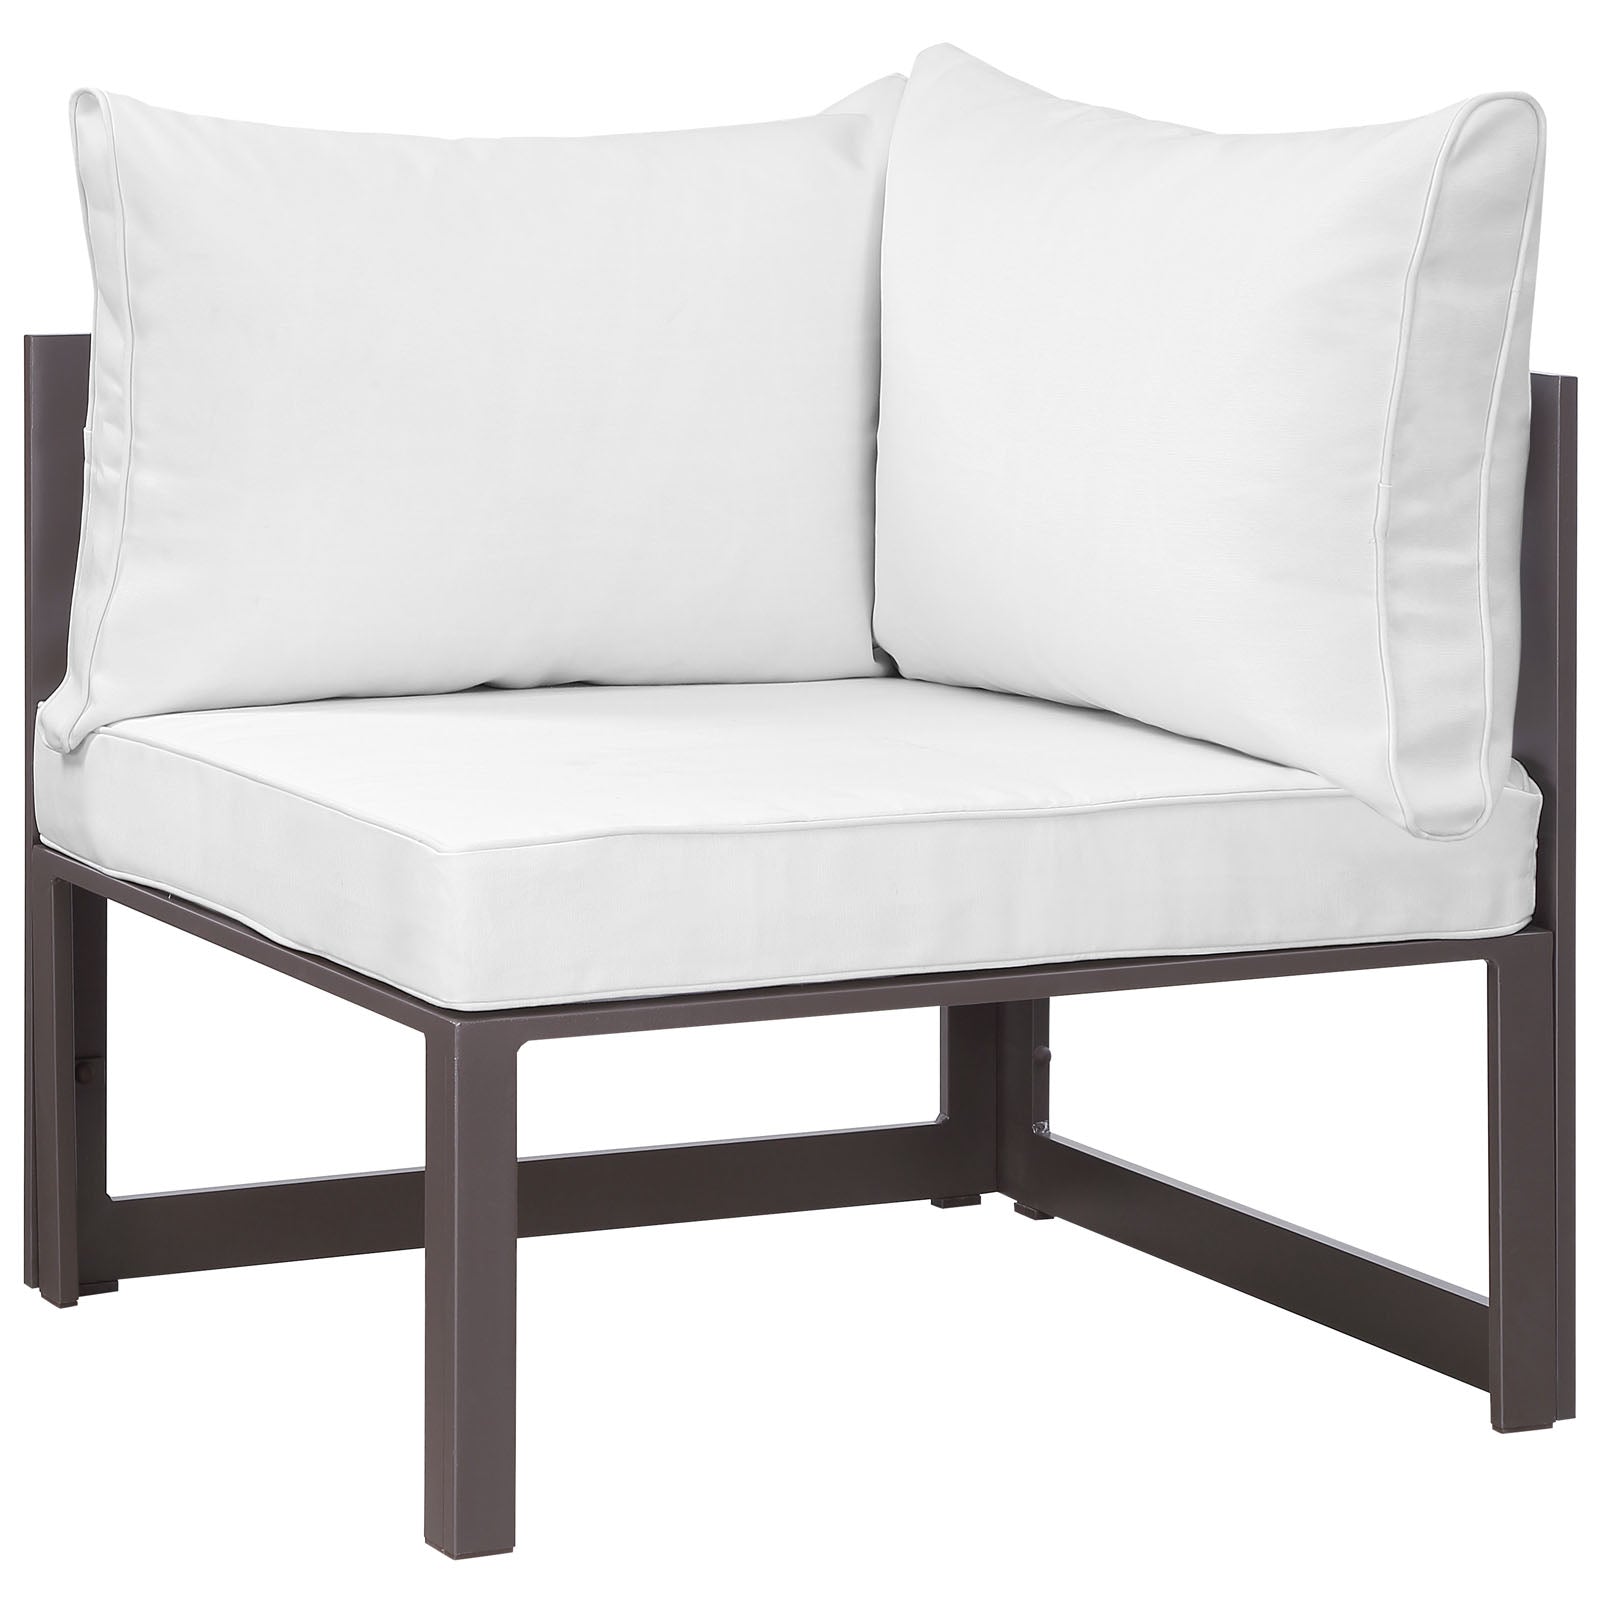 Modway Outdoor Chairs - Fortuna Corner Outdoor Patio Chair Brown & White